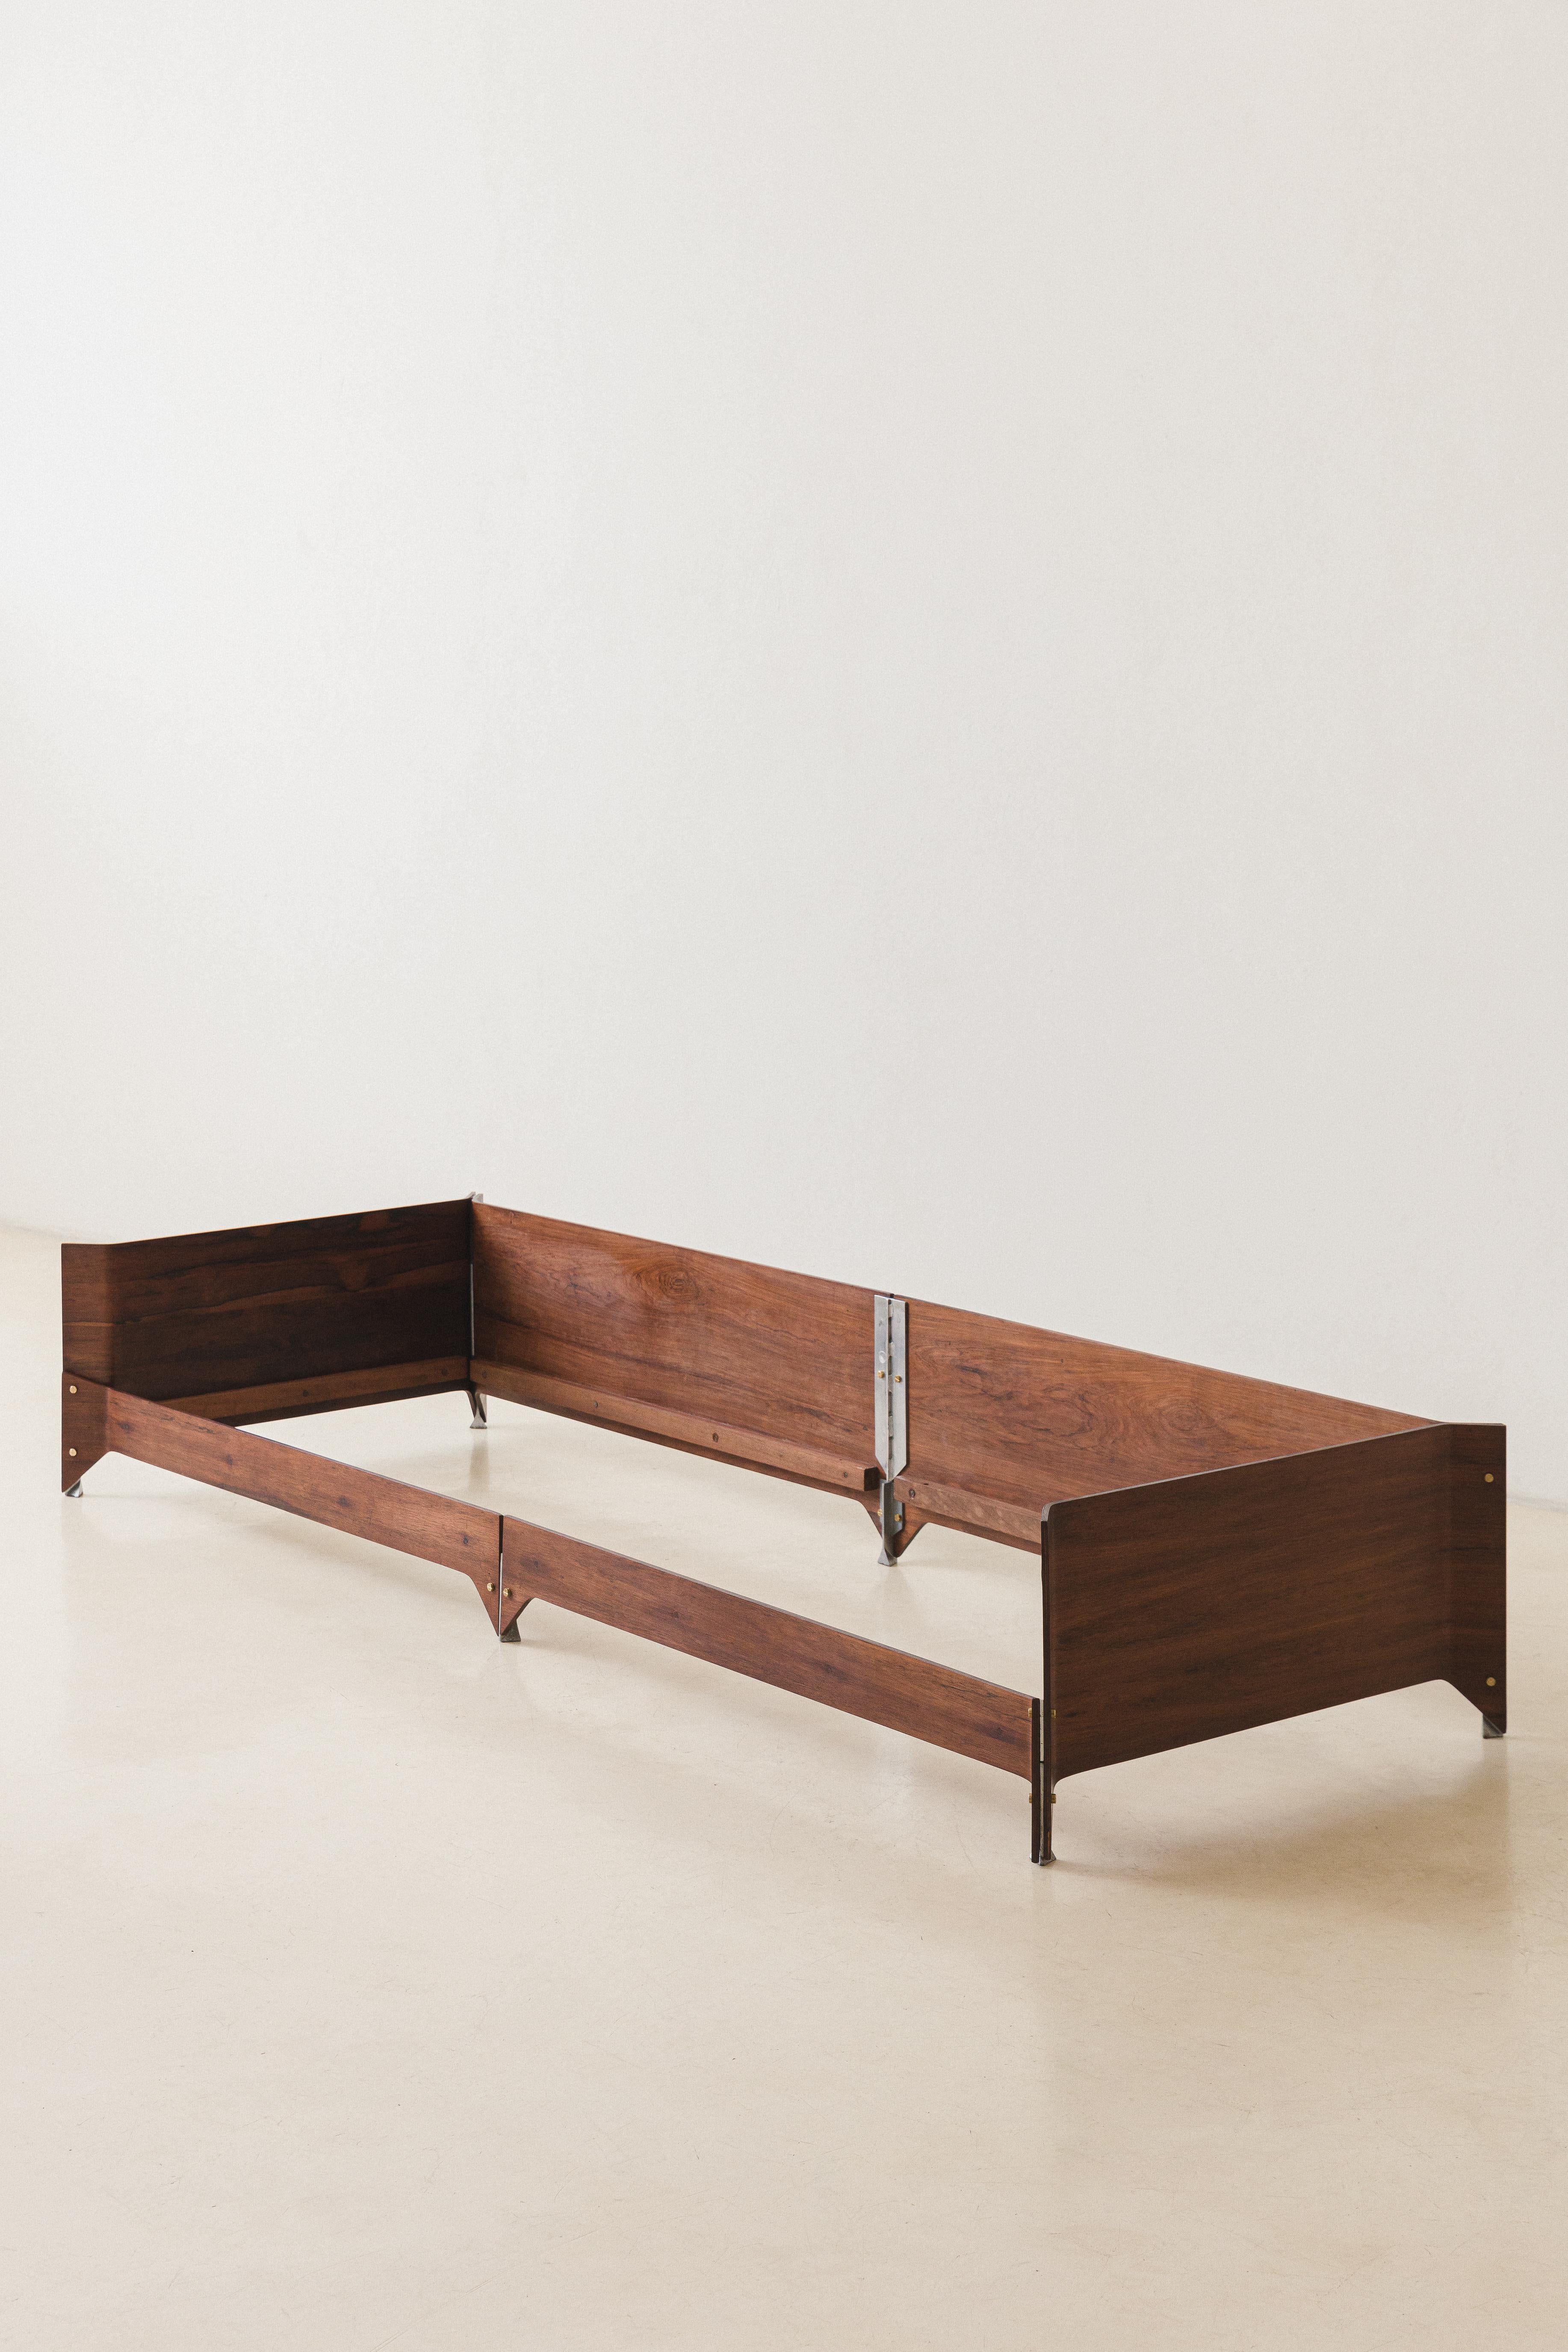 Fabric Iconic Brasiliana Sofa Design by Jorge Zalszupin, Rosewood and Brass, 1960s For Sale